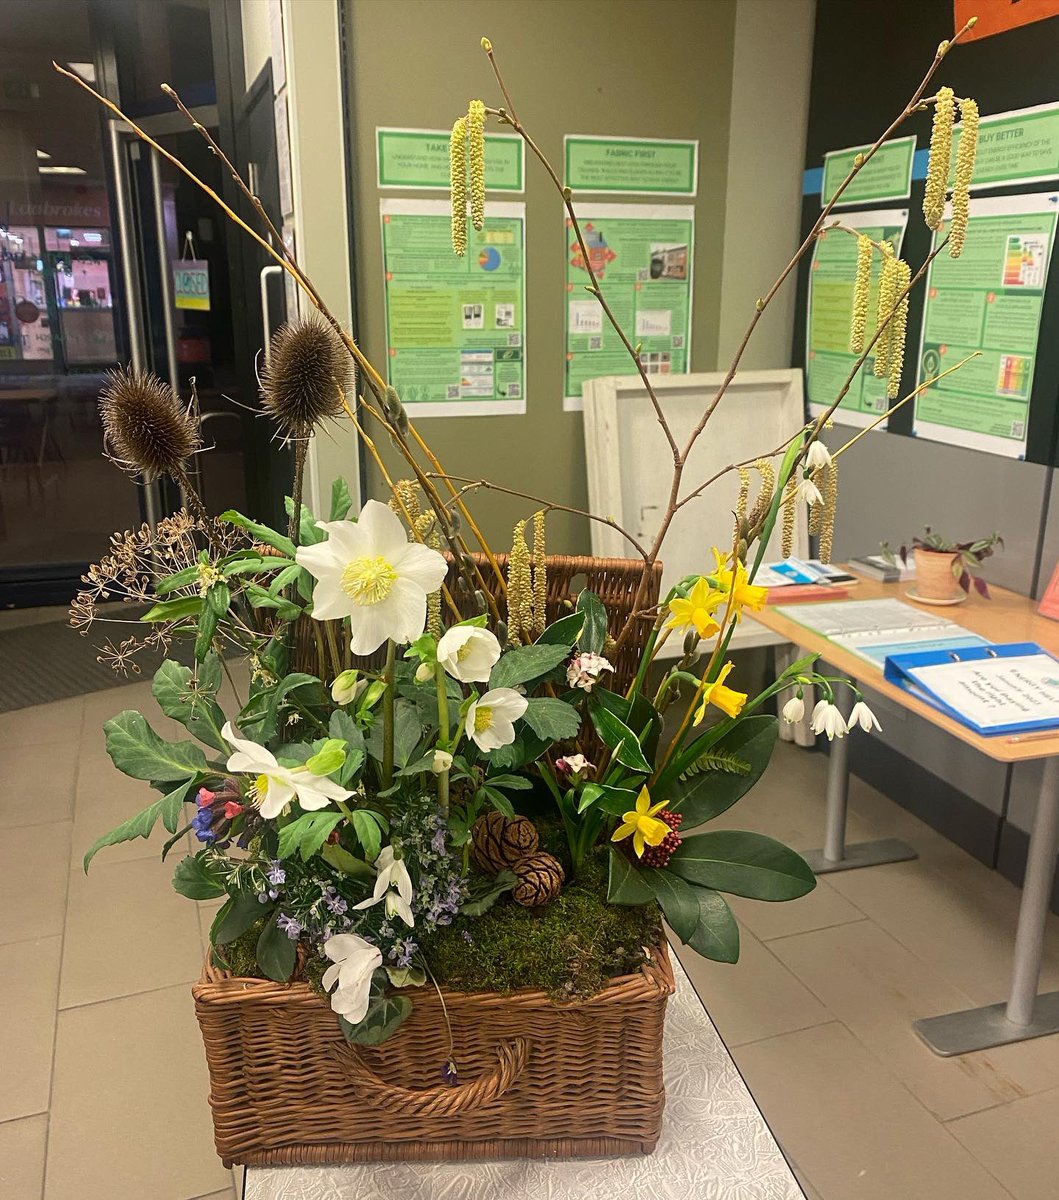 A mindful, informative and fun evening had by all at CREW’s first event, thank you Breathing Spaces  💐

The next Bread For All & Roses Too event will be Wed 8th March, book your place on EventBrite: eventbrite.co.uk/e/519575713947 

#WorthingEvents #GardeningClub